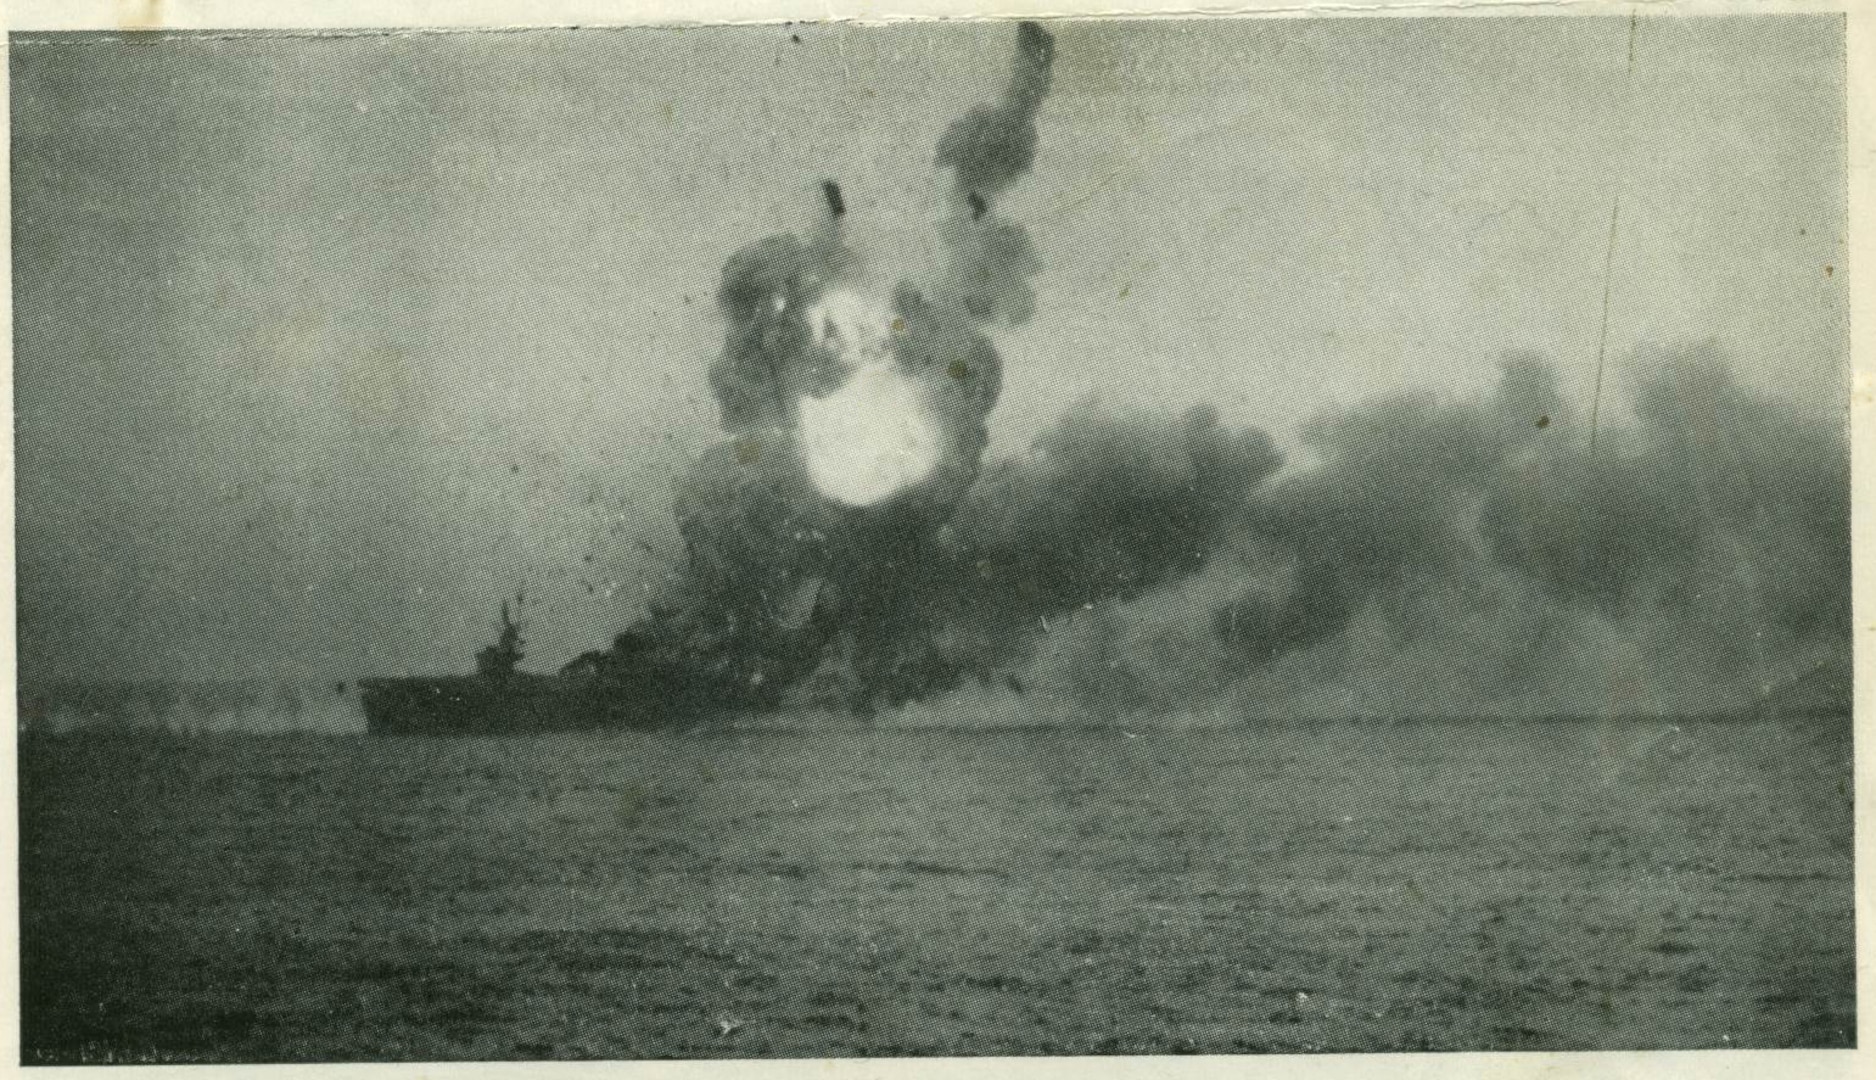 USS St. Lo (CVE 63) is badly damaged after a Japanese kamikaze plane hit the ship and caused an explosion. (U.S. Navy photo)